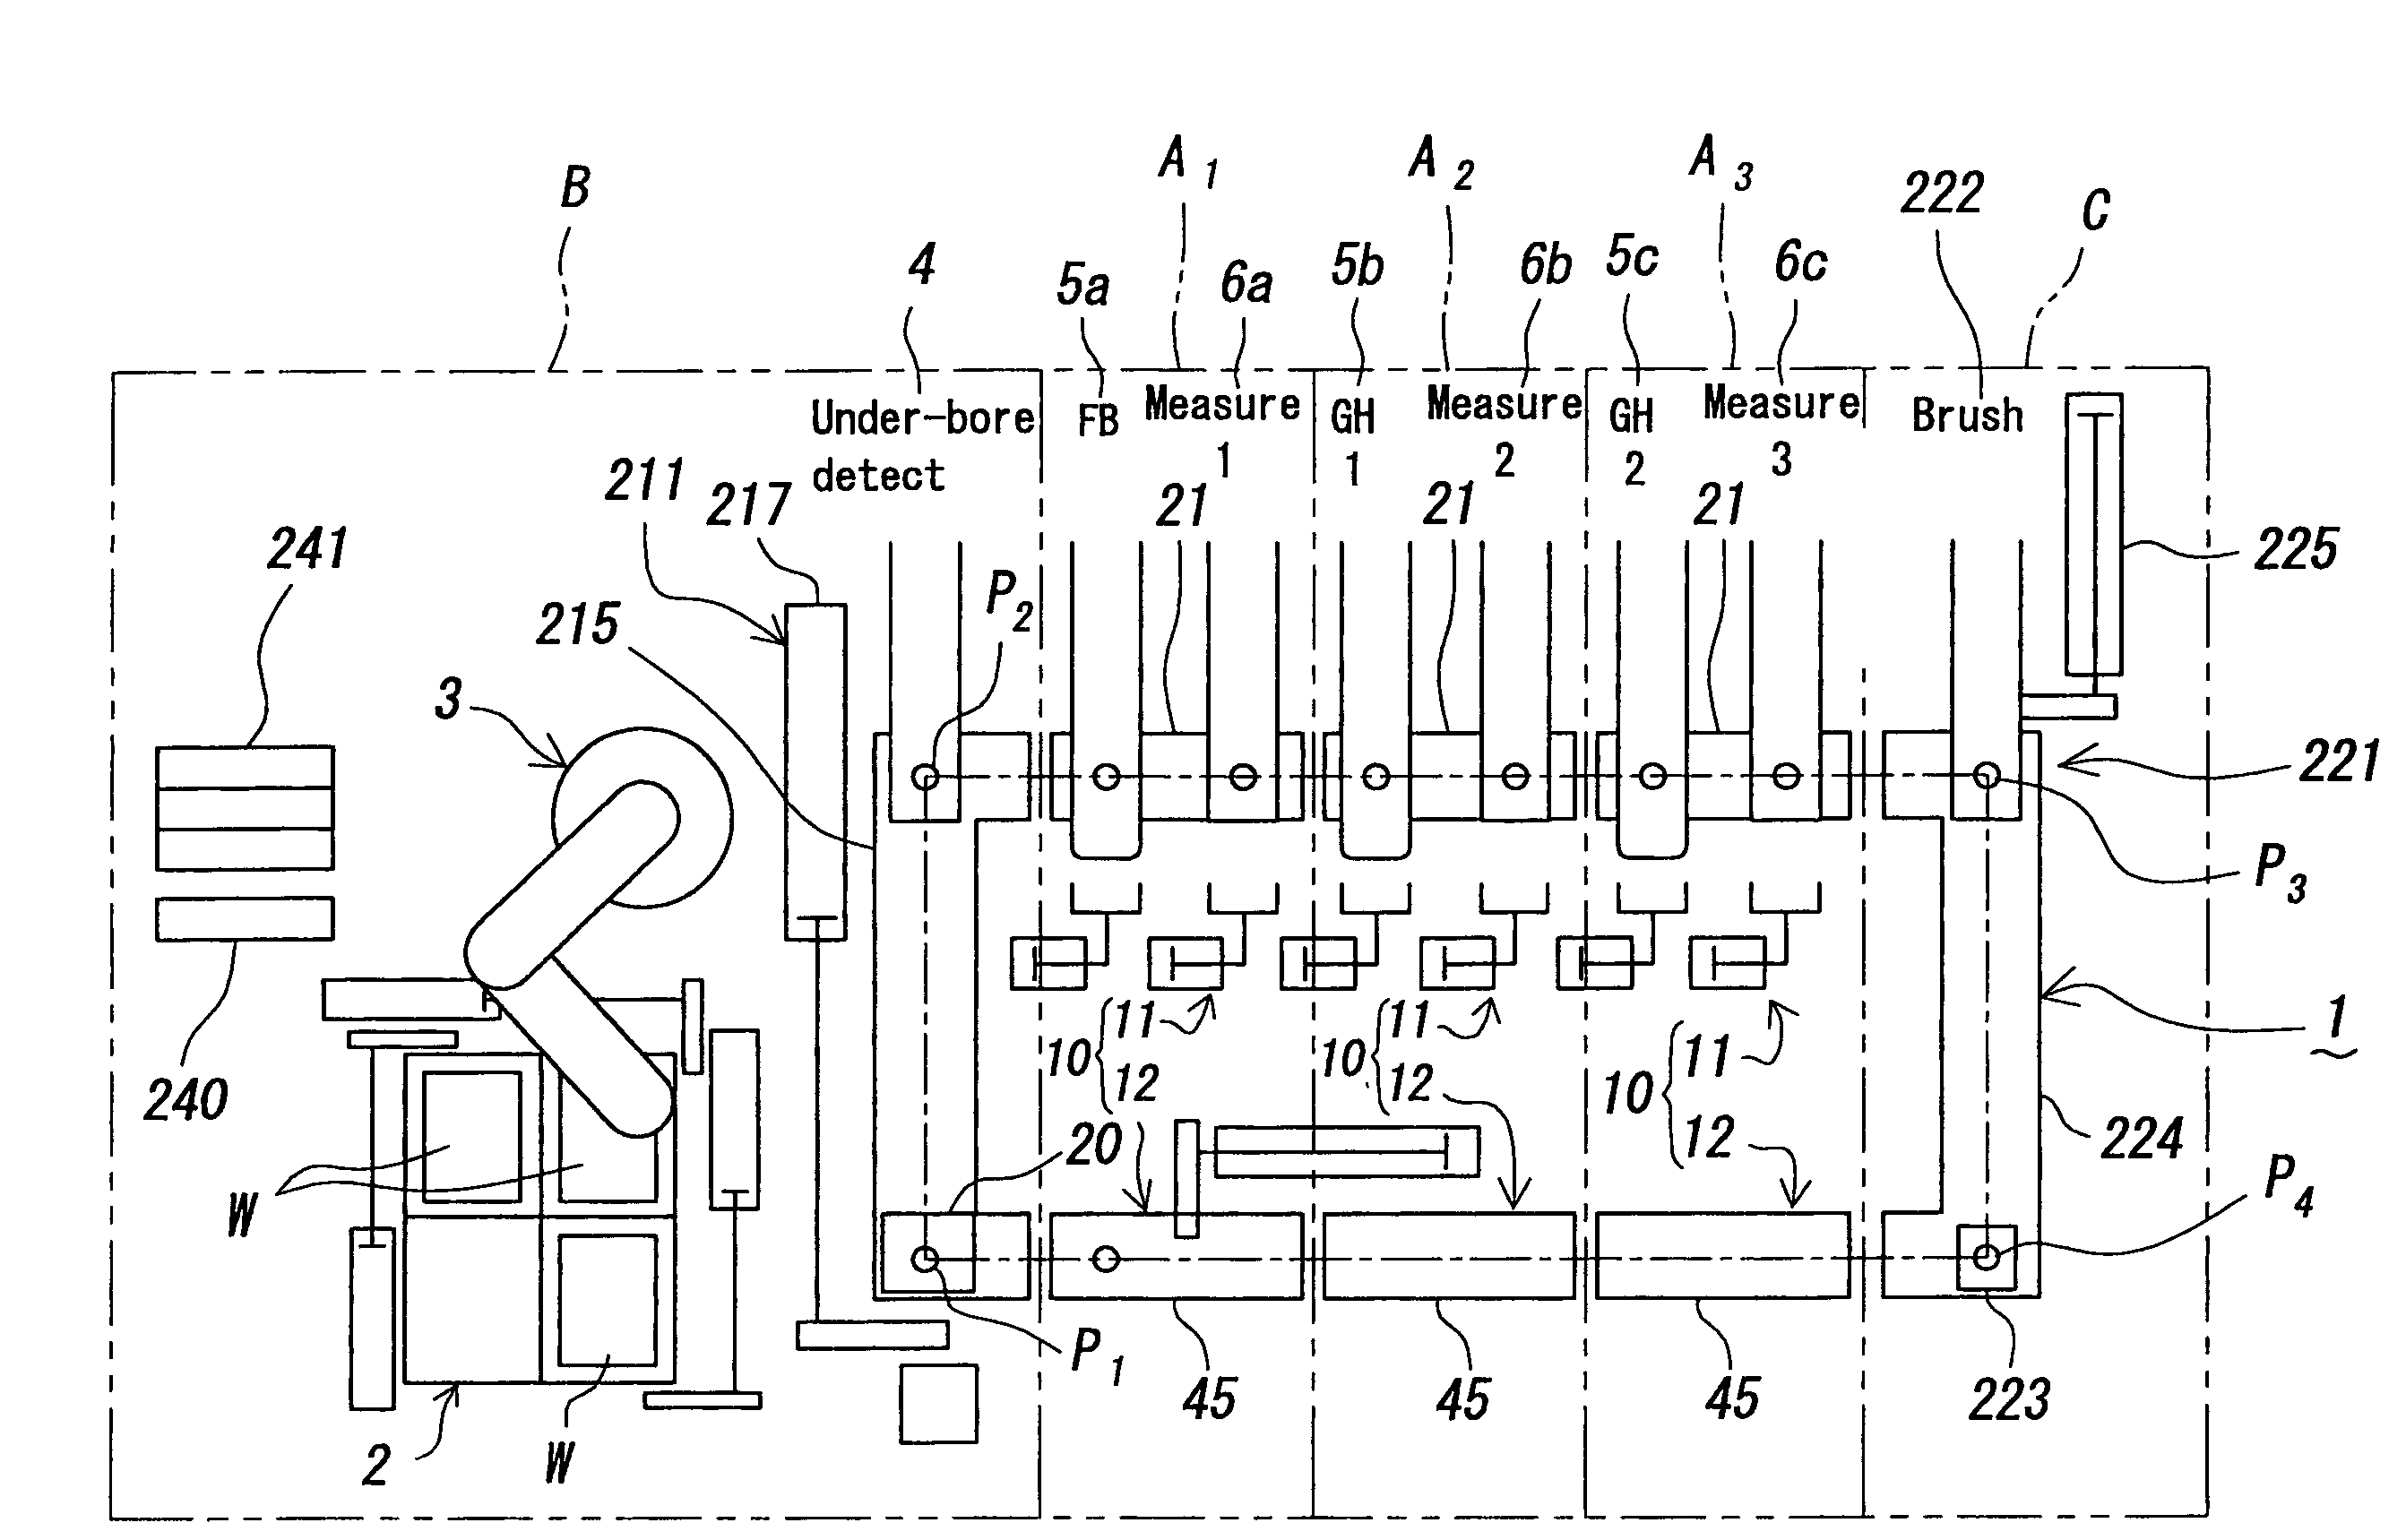 Processing cell of automatic machining system and automatic honing system